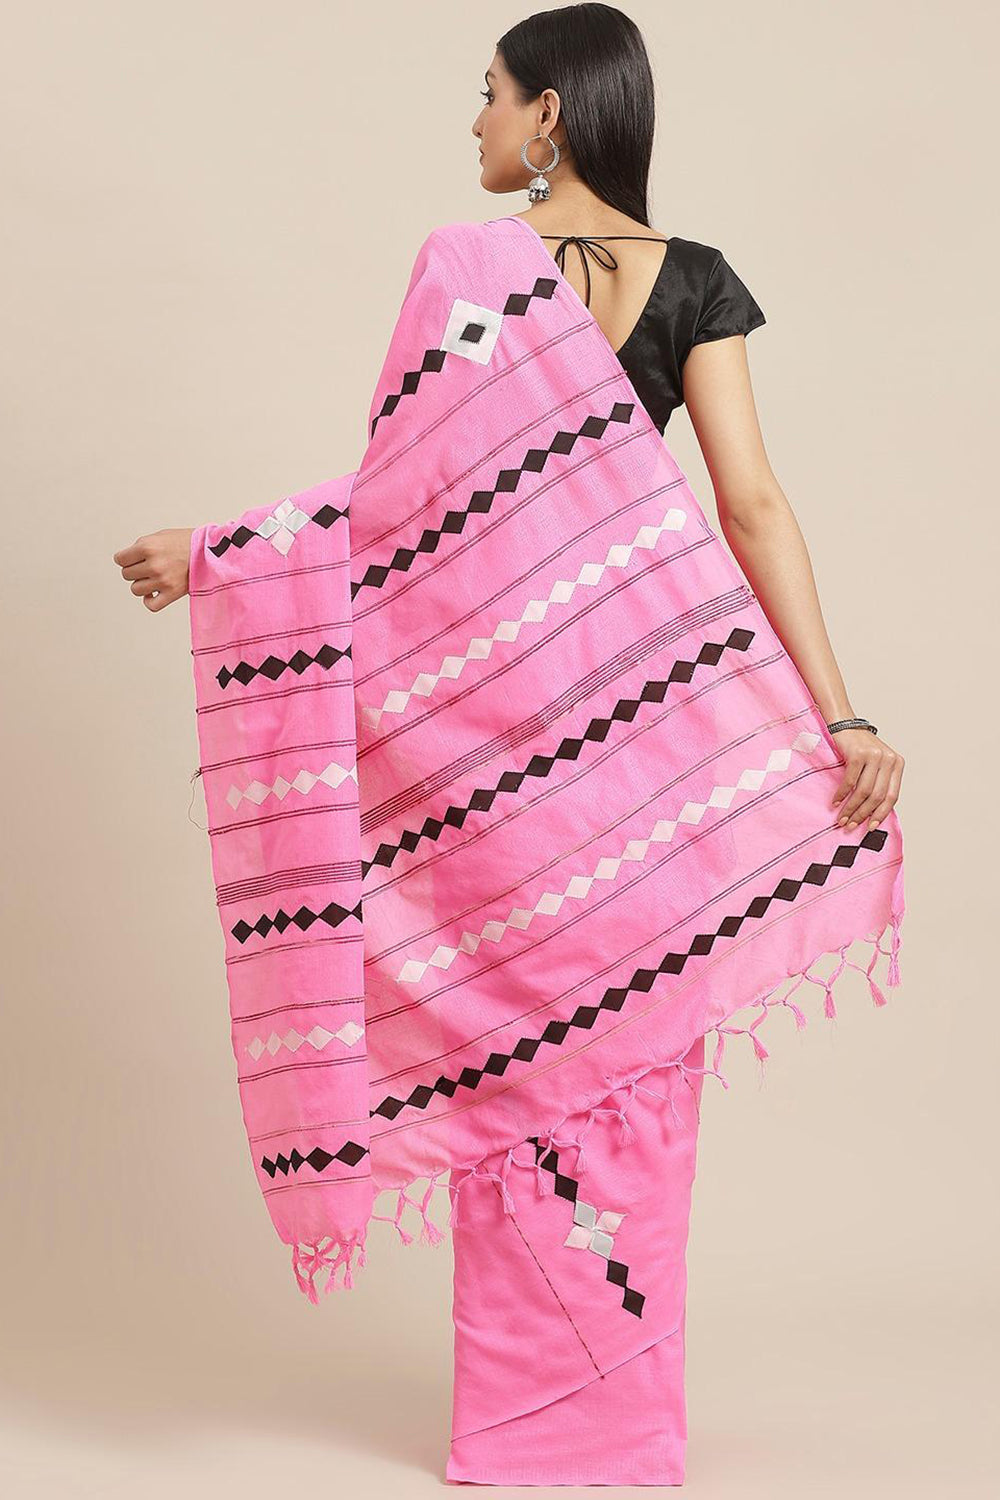 Shop Tia Pink Woven Cotton Blend One Minute Saree at best offer at our  Store - One Minute Saree